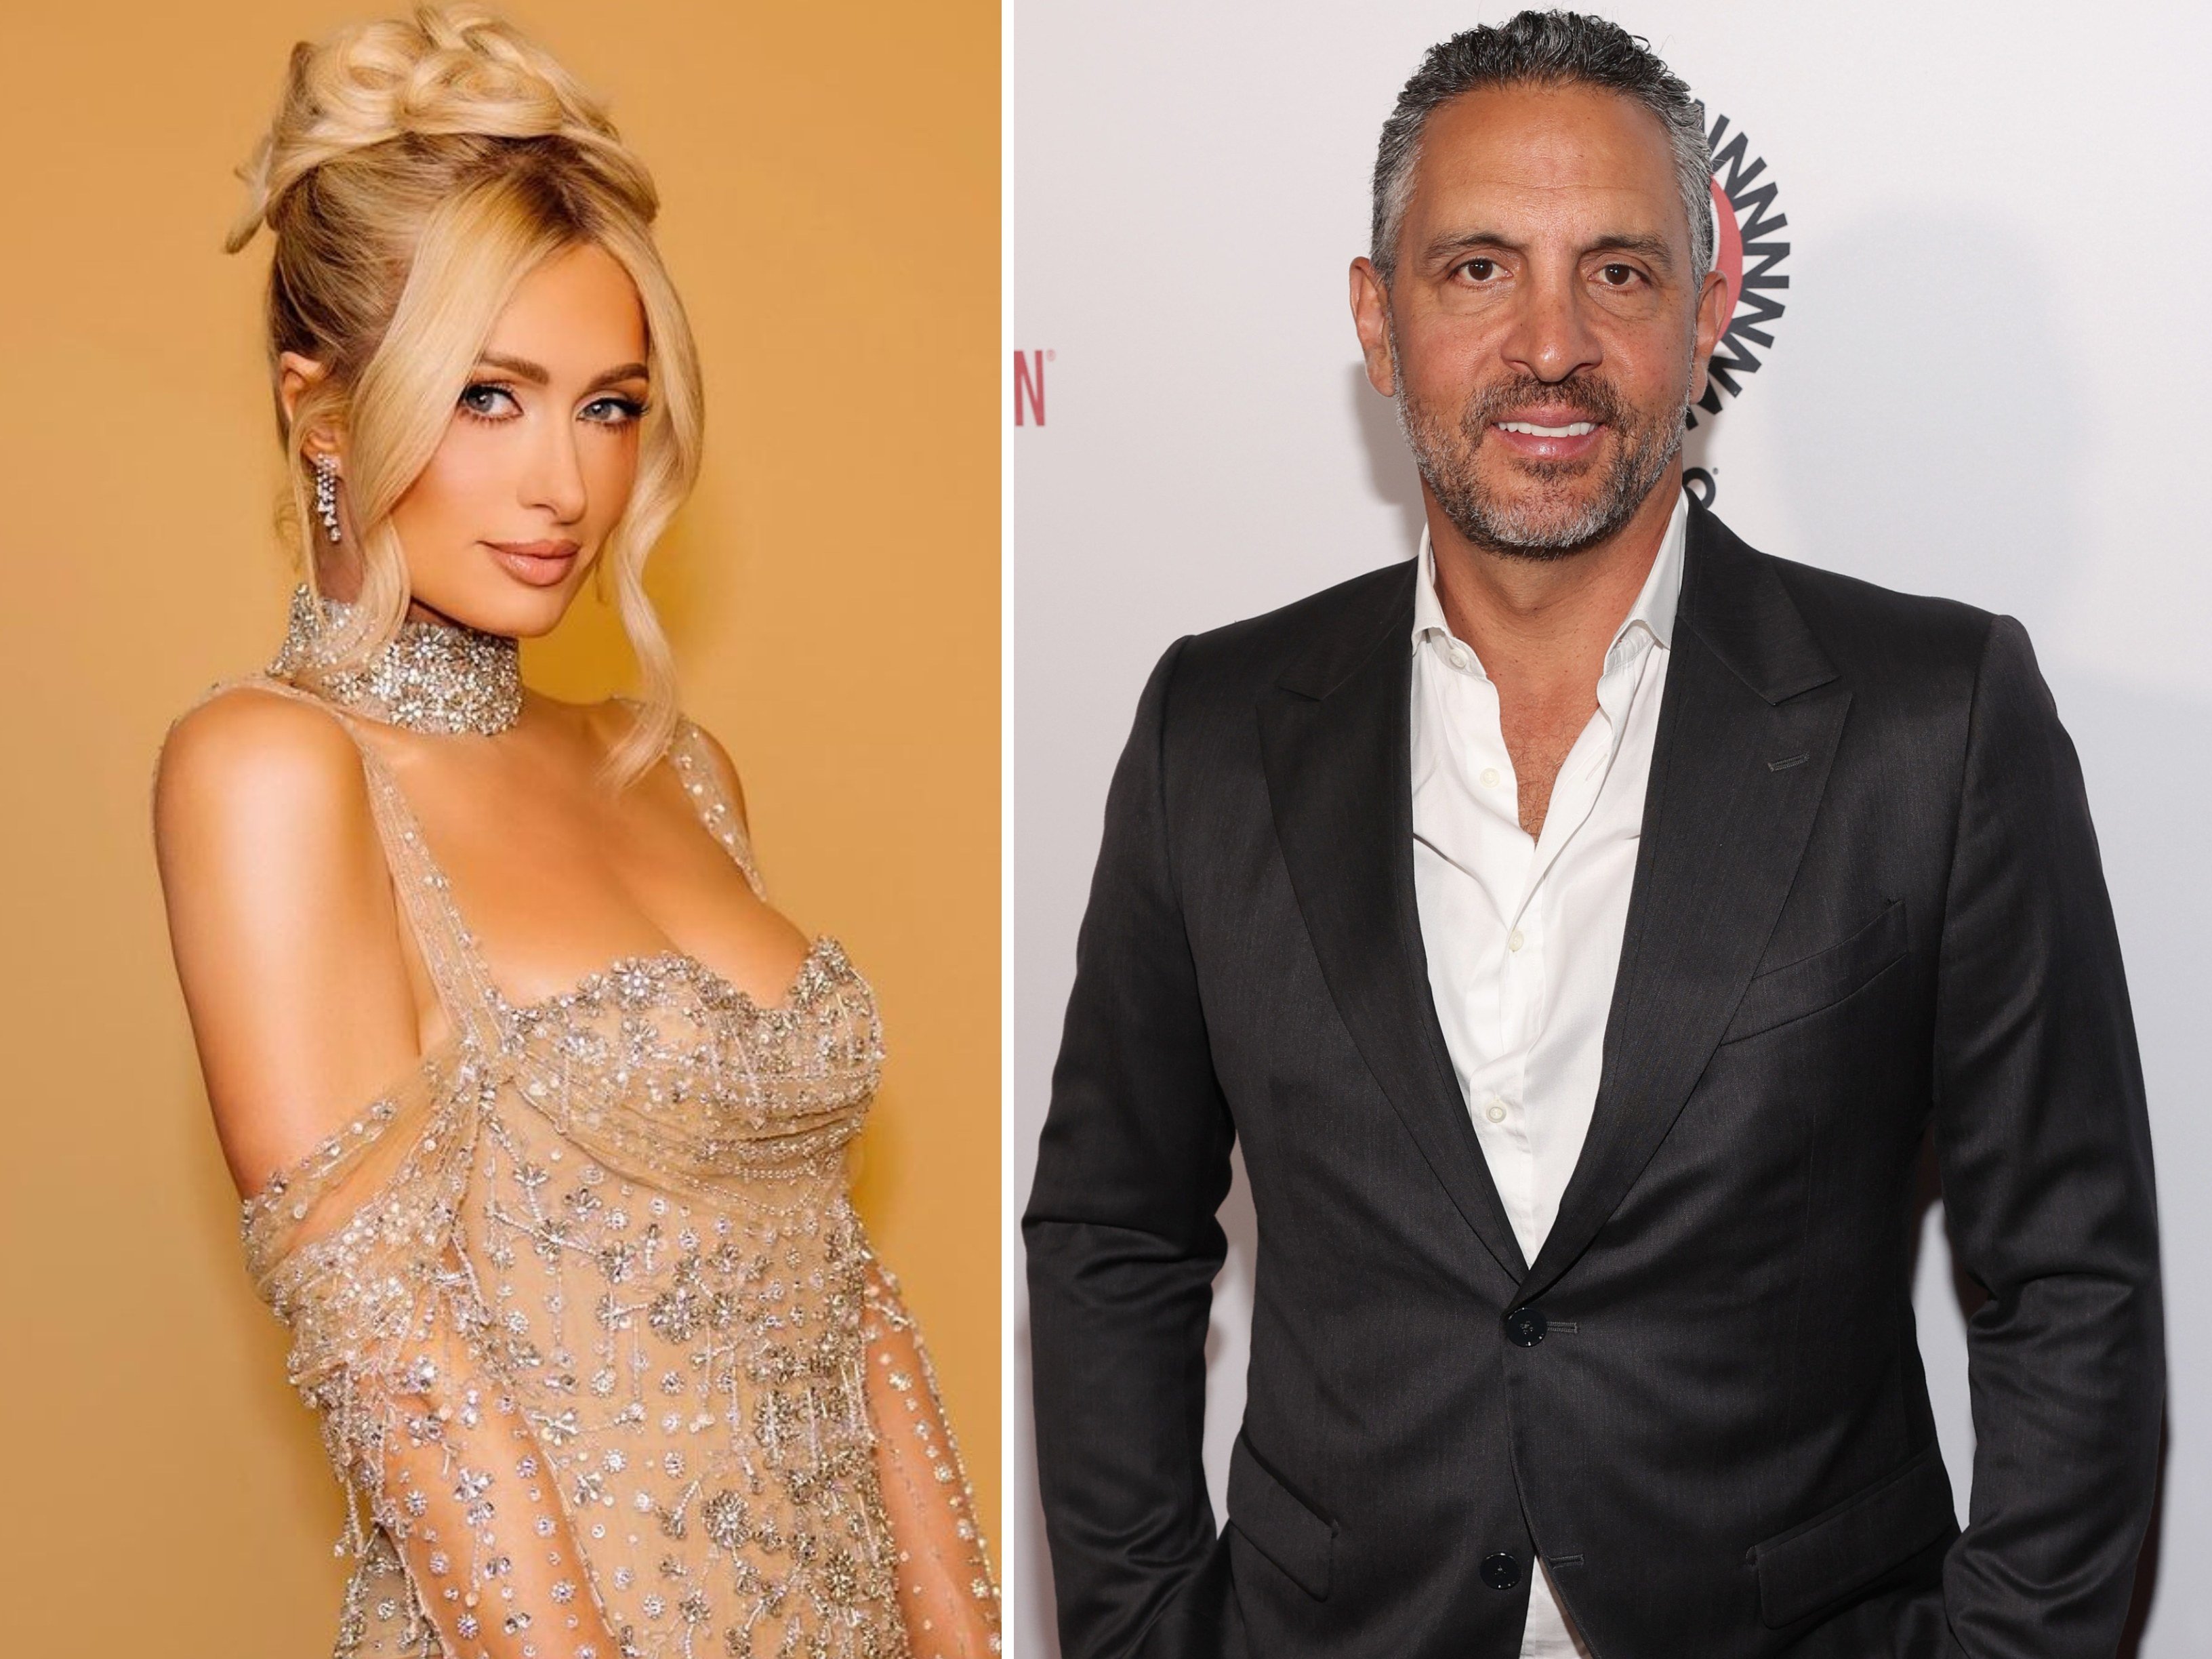 Paris Hilton just clapped back at her uncle, Mauricio Umansky (pictured), over comments he made about her family on his reality show Buying Beverly Hills. Photos: @parishilton/Instagram, Getty Images